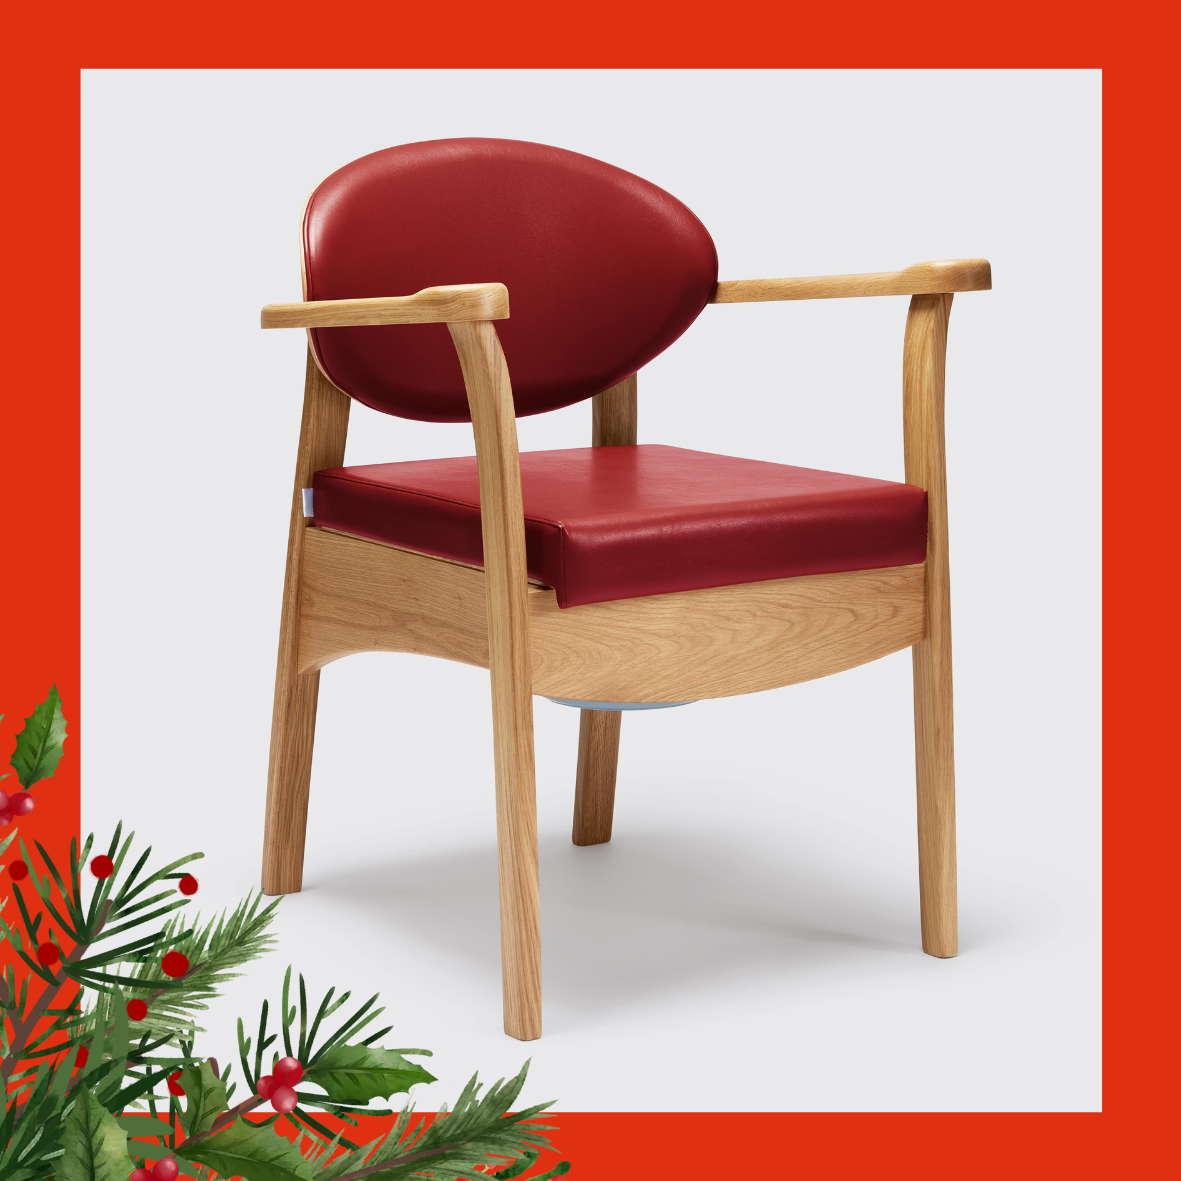 An image of the commode chair, which is a wooden chair with a red leather seat and back rest. 